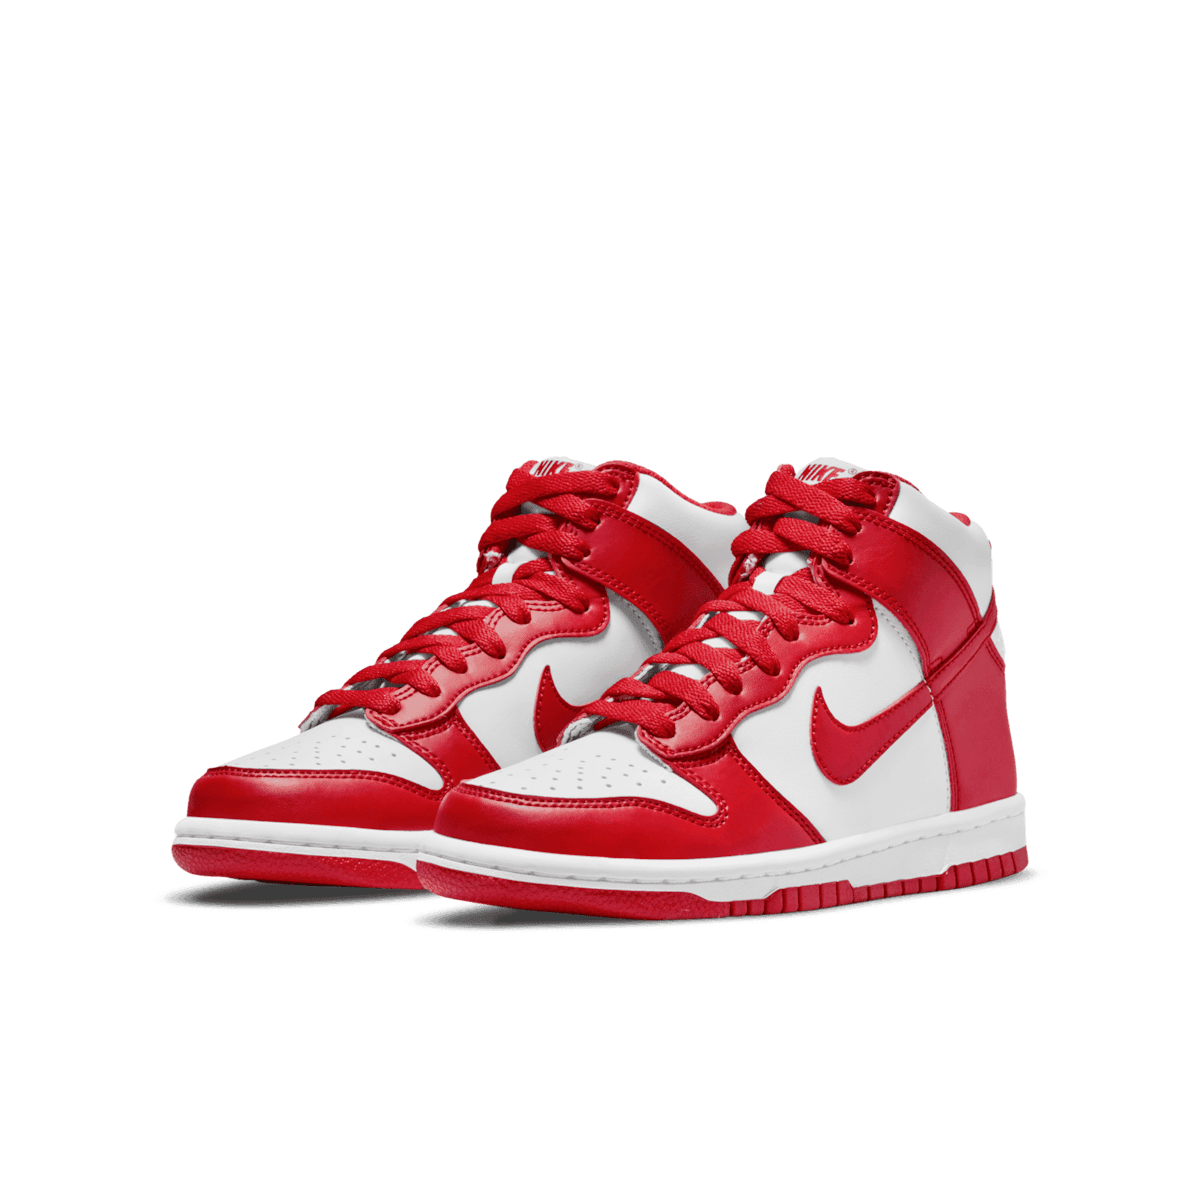 Nike Dunk High Championship White Red (GS) Angle 2